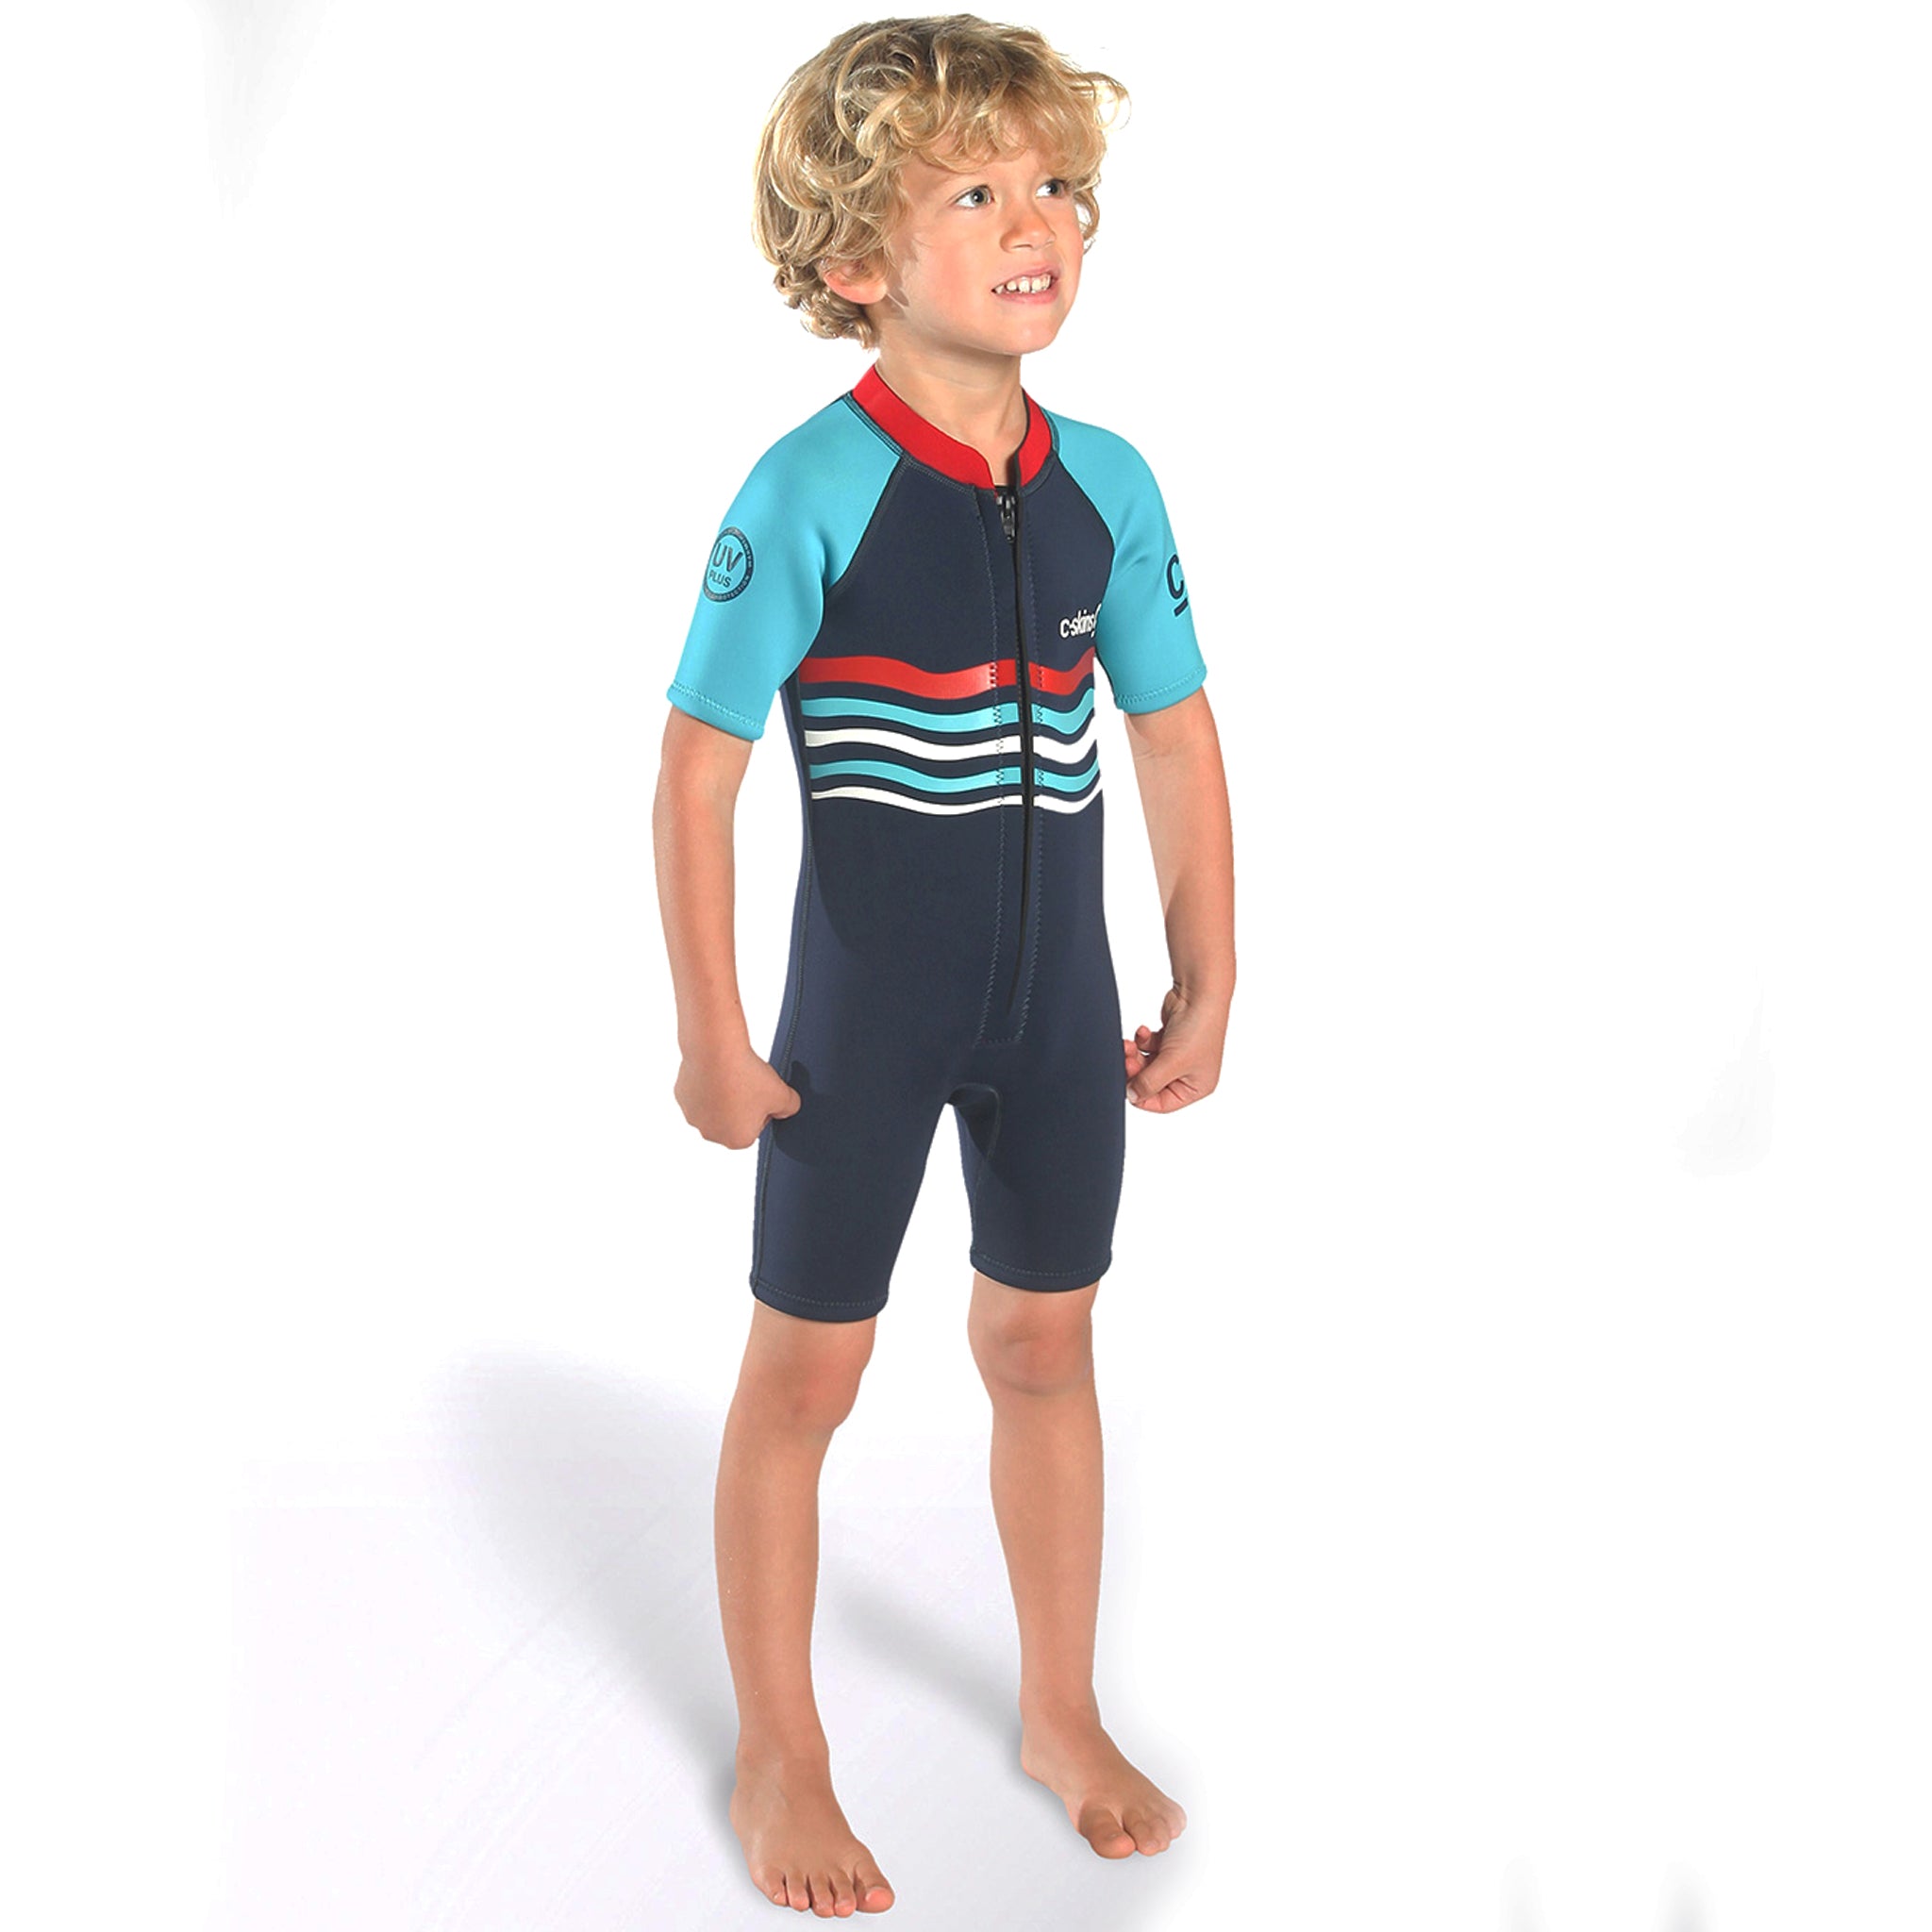 C-Skins Baby C-KID Waves Shortie Wetsuit Ink/Turquoise/Red Right side